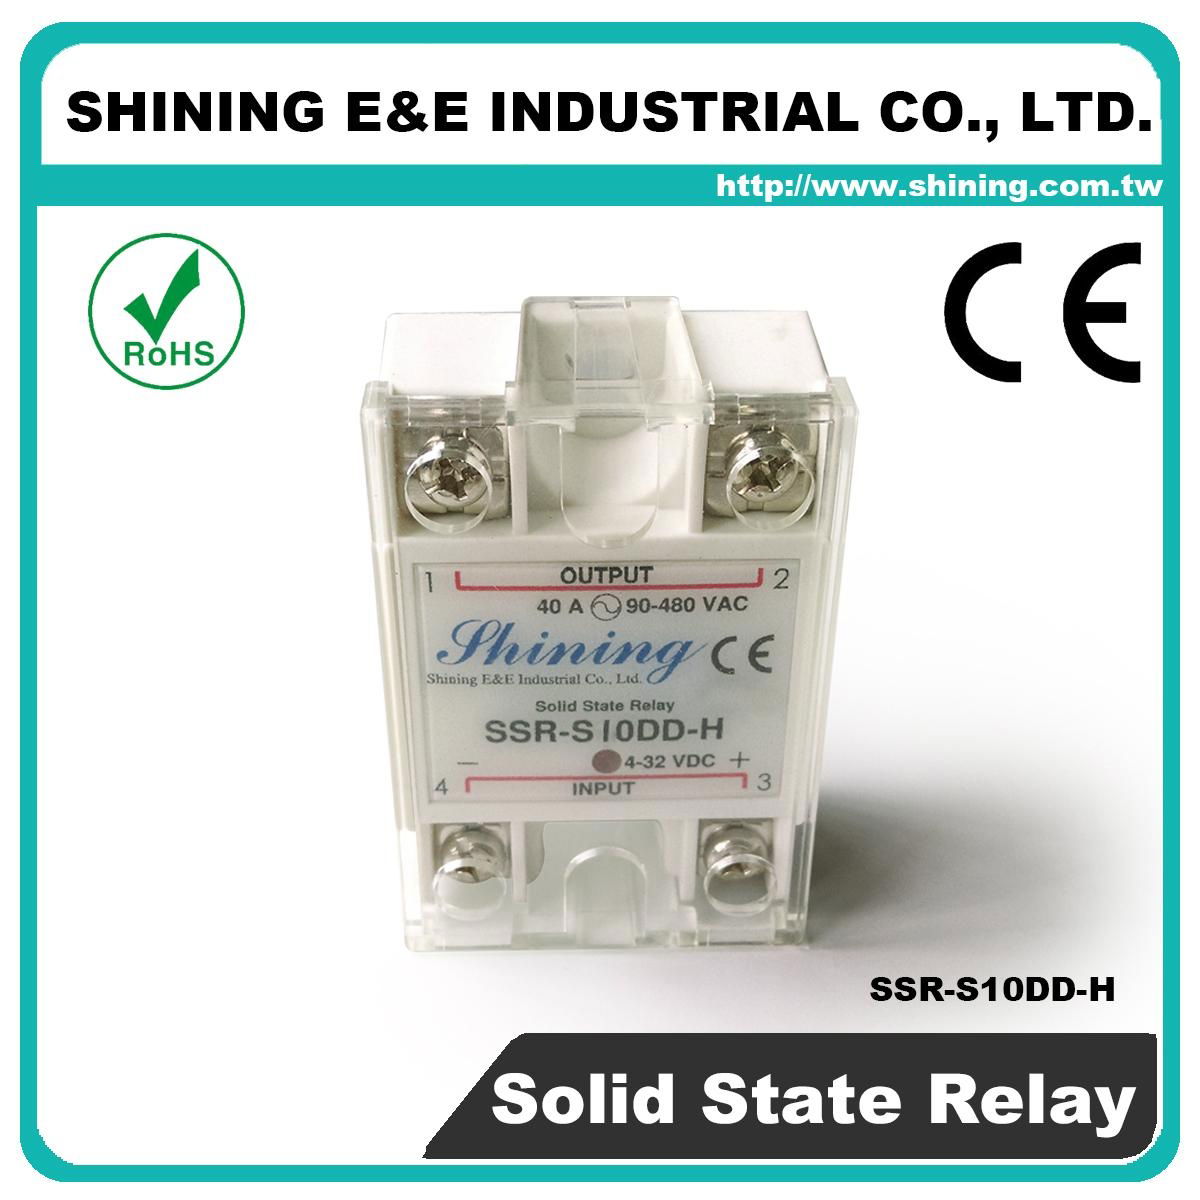 SSR-S10DD-H DC to DC Single Phase Photocouple Solid State Relay 5